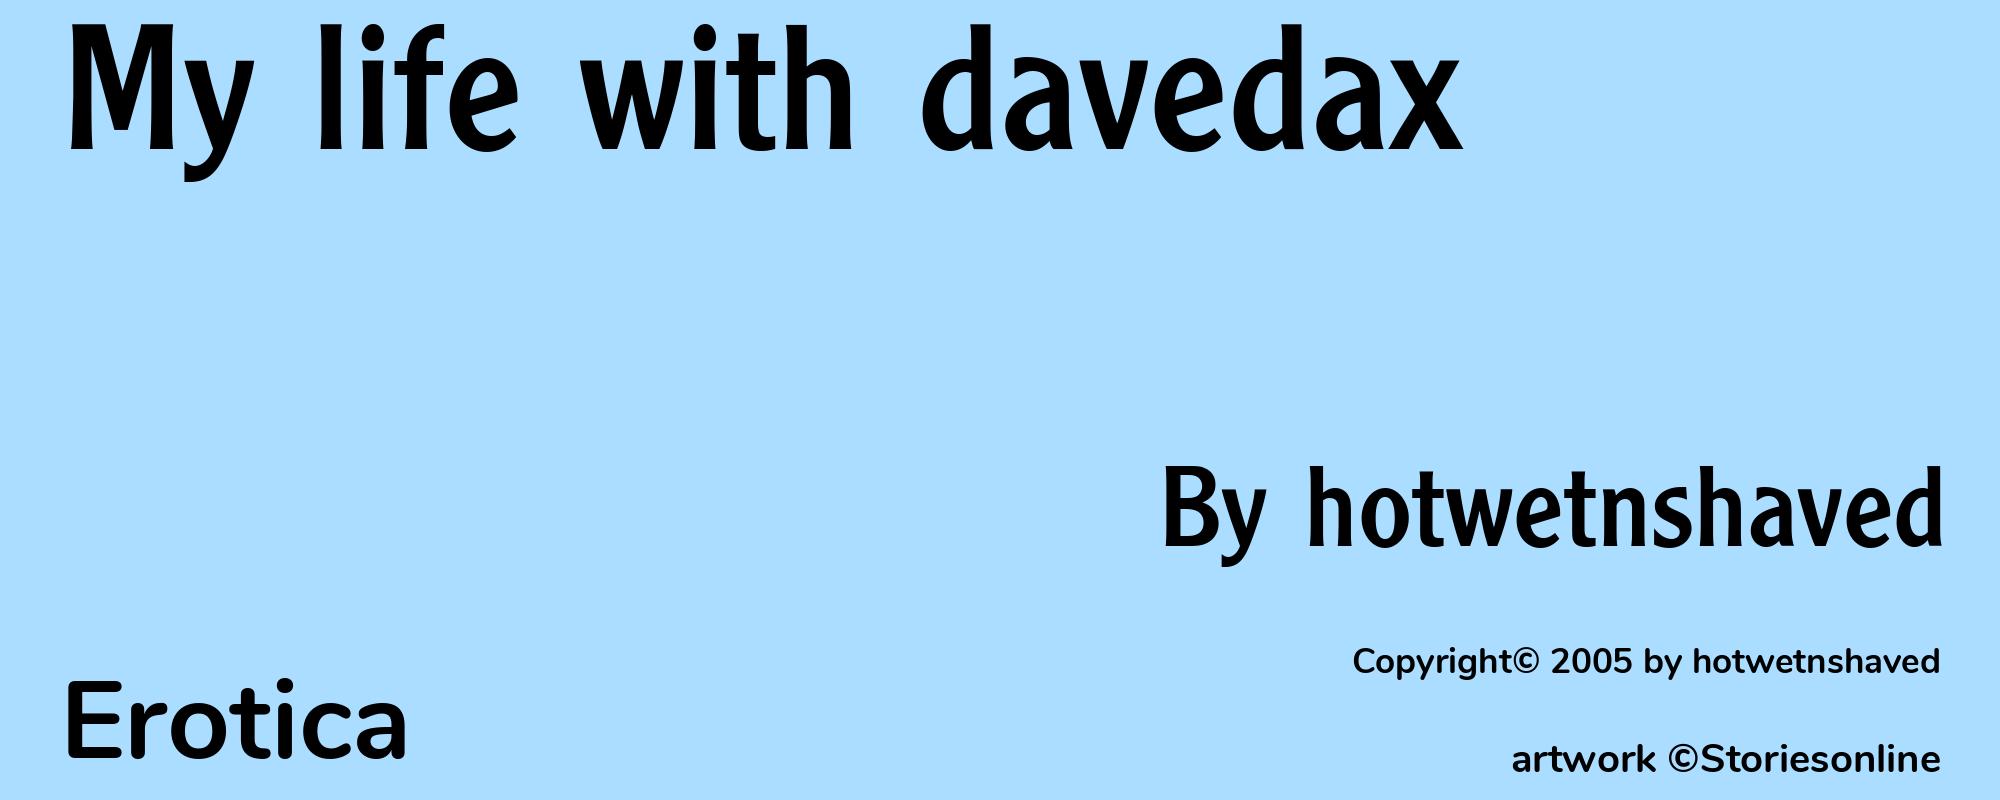 My life with davedax - Cover